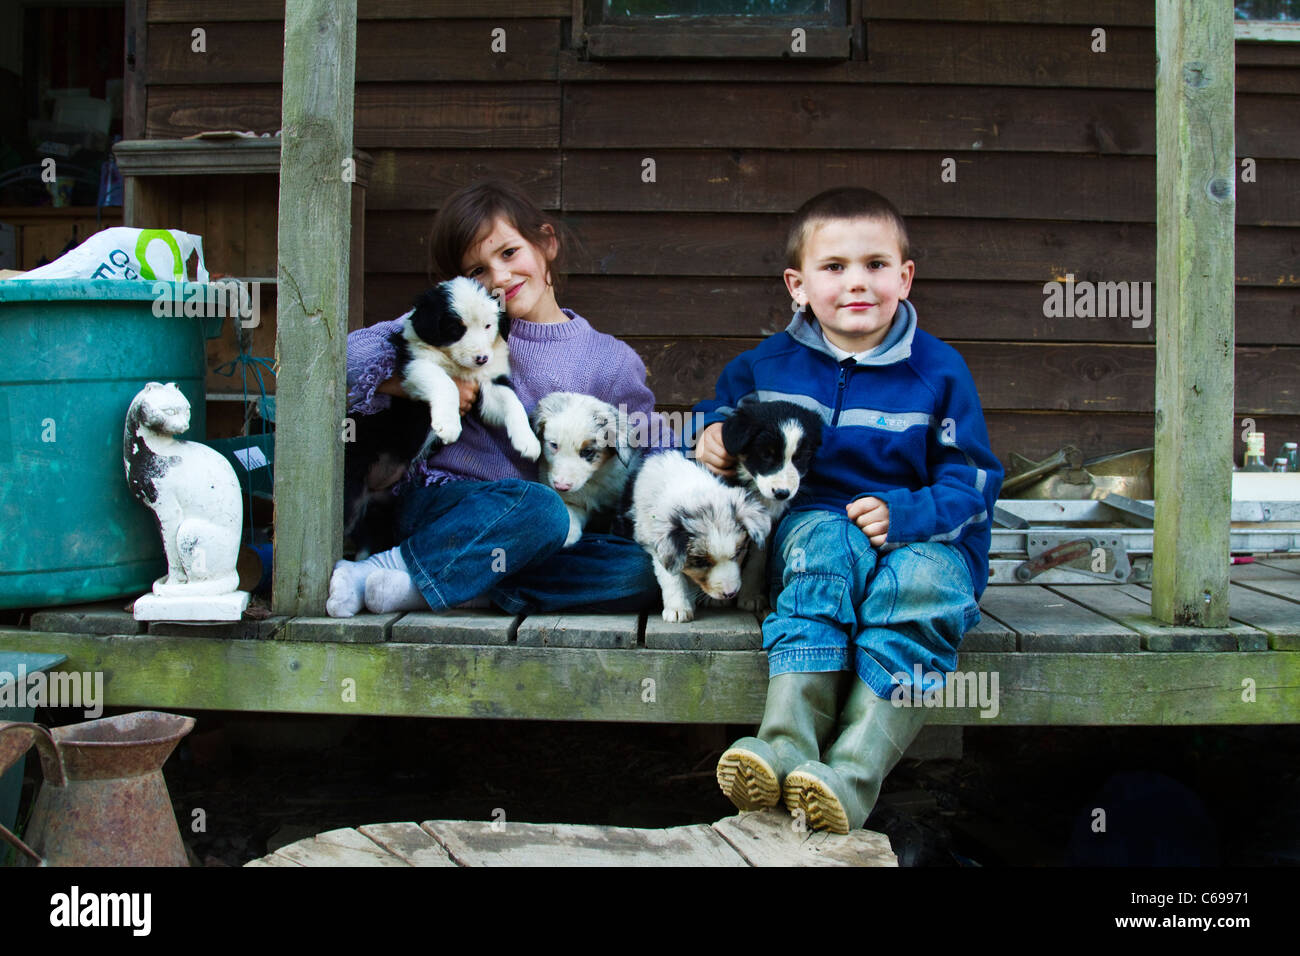 Farm children with sheep dog puppies Stock Photo